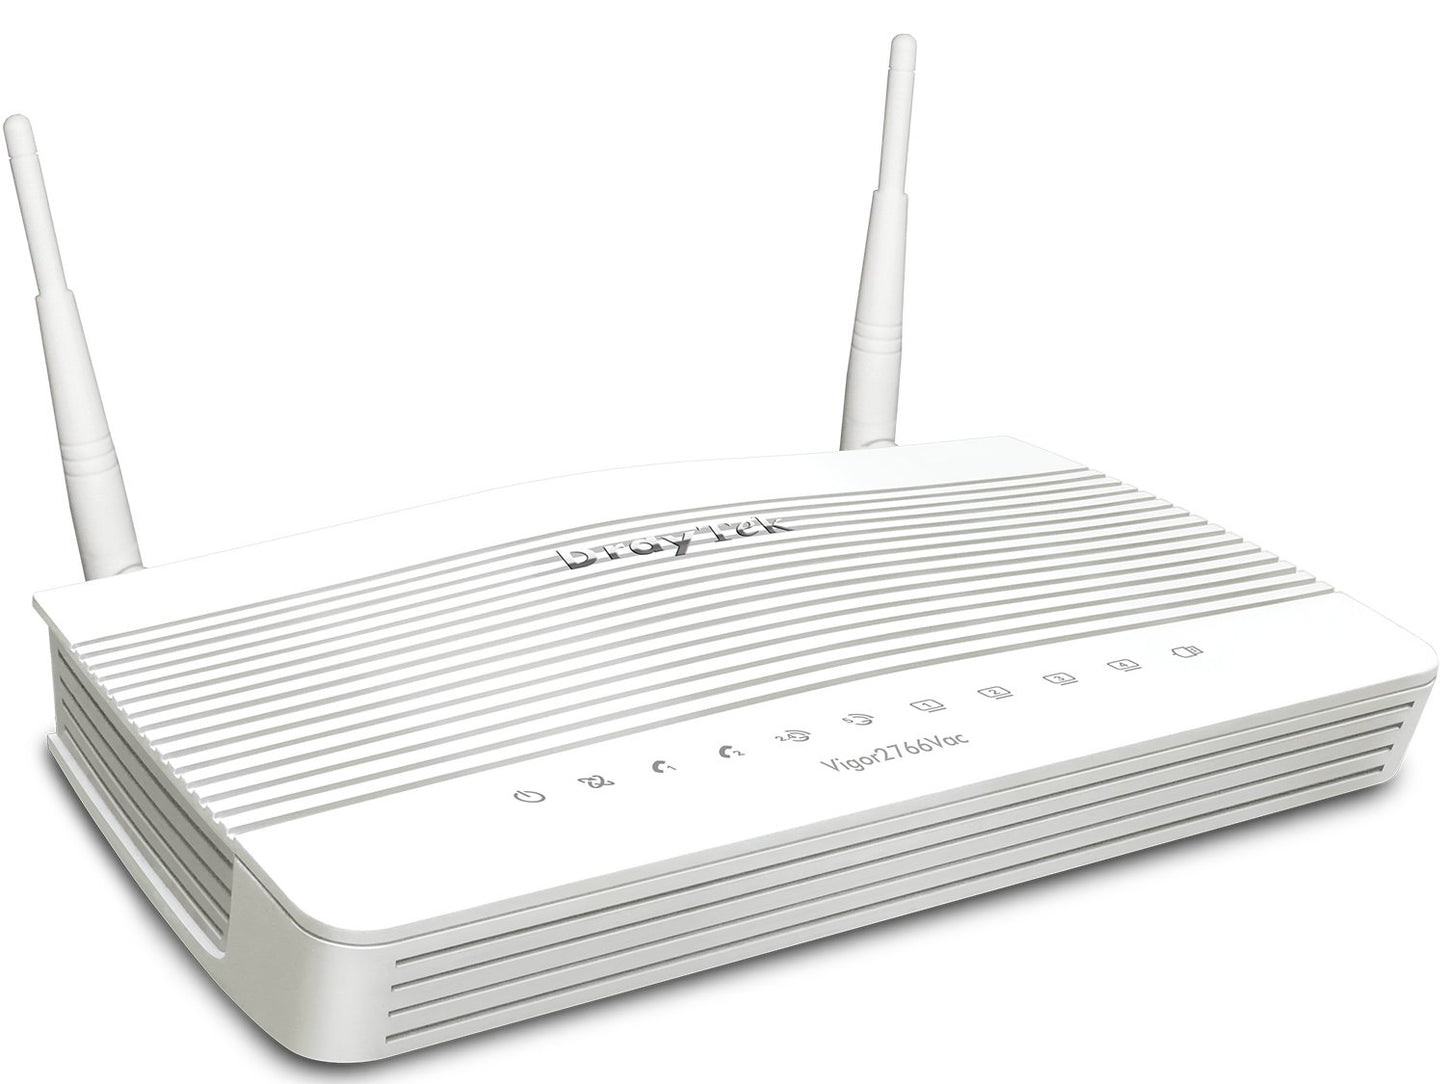 DrayTek Vigor 2766Vac G.Fast, DSL Router with Wi-Fi 5 AC1300 and VoIP